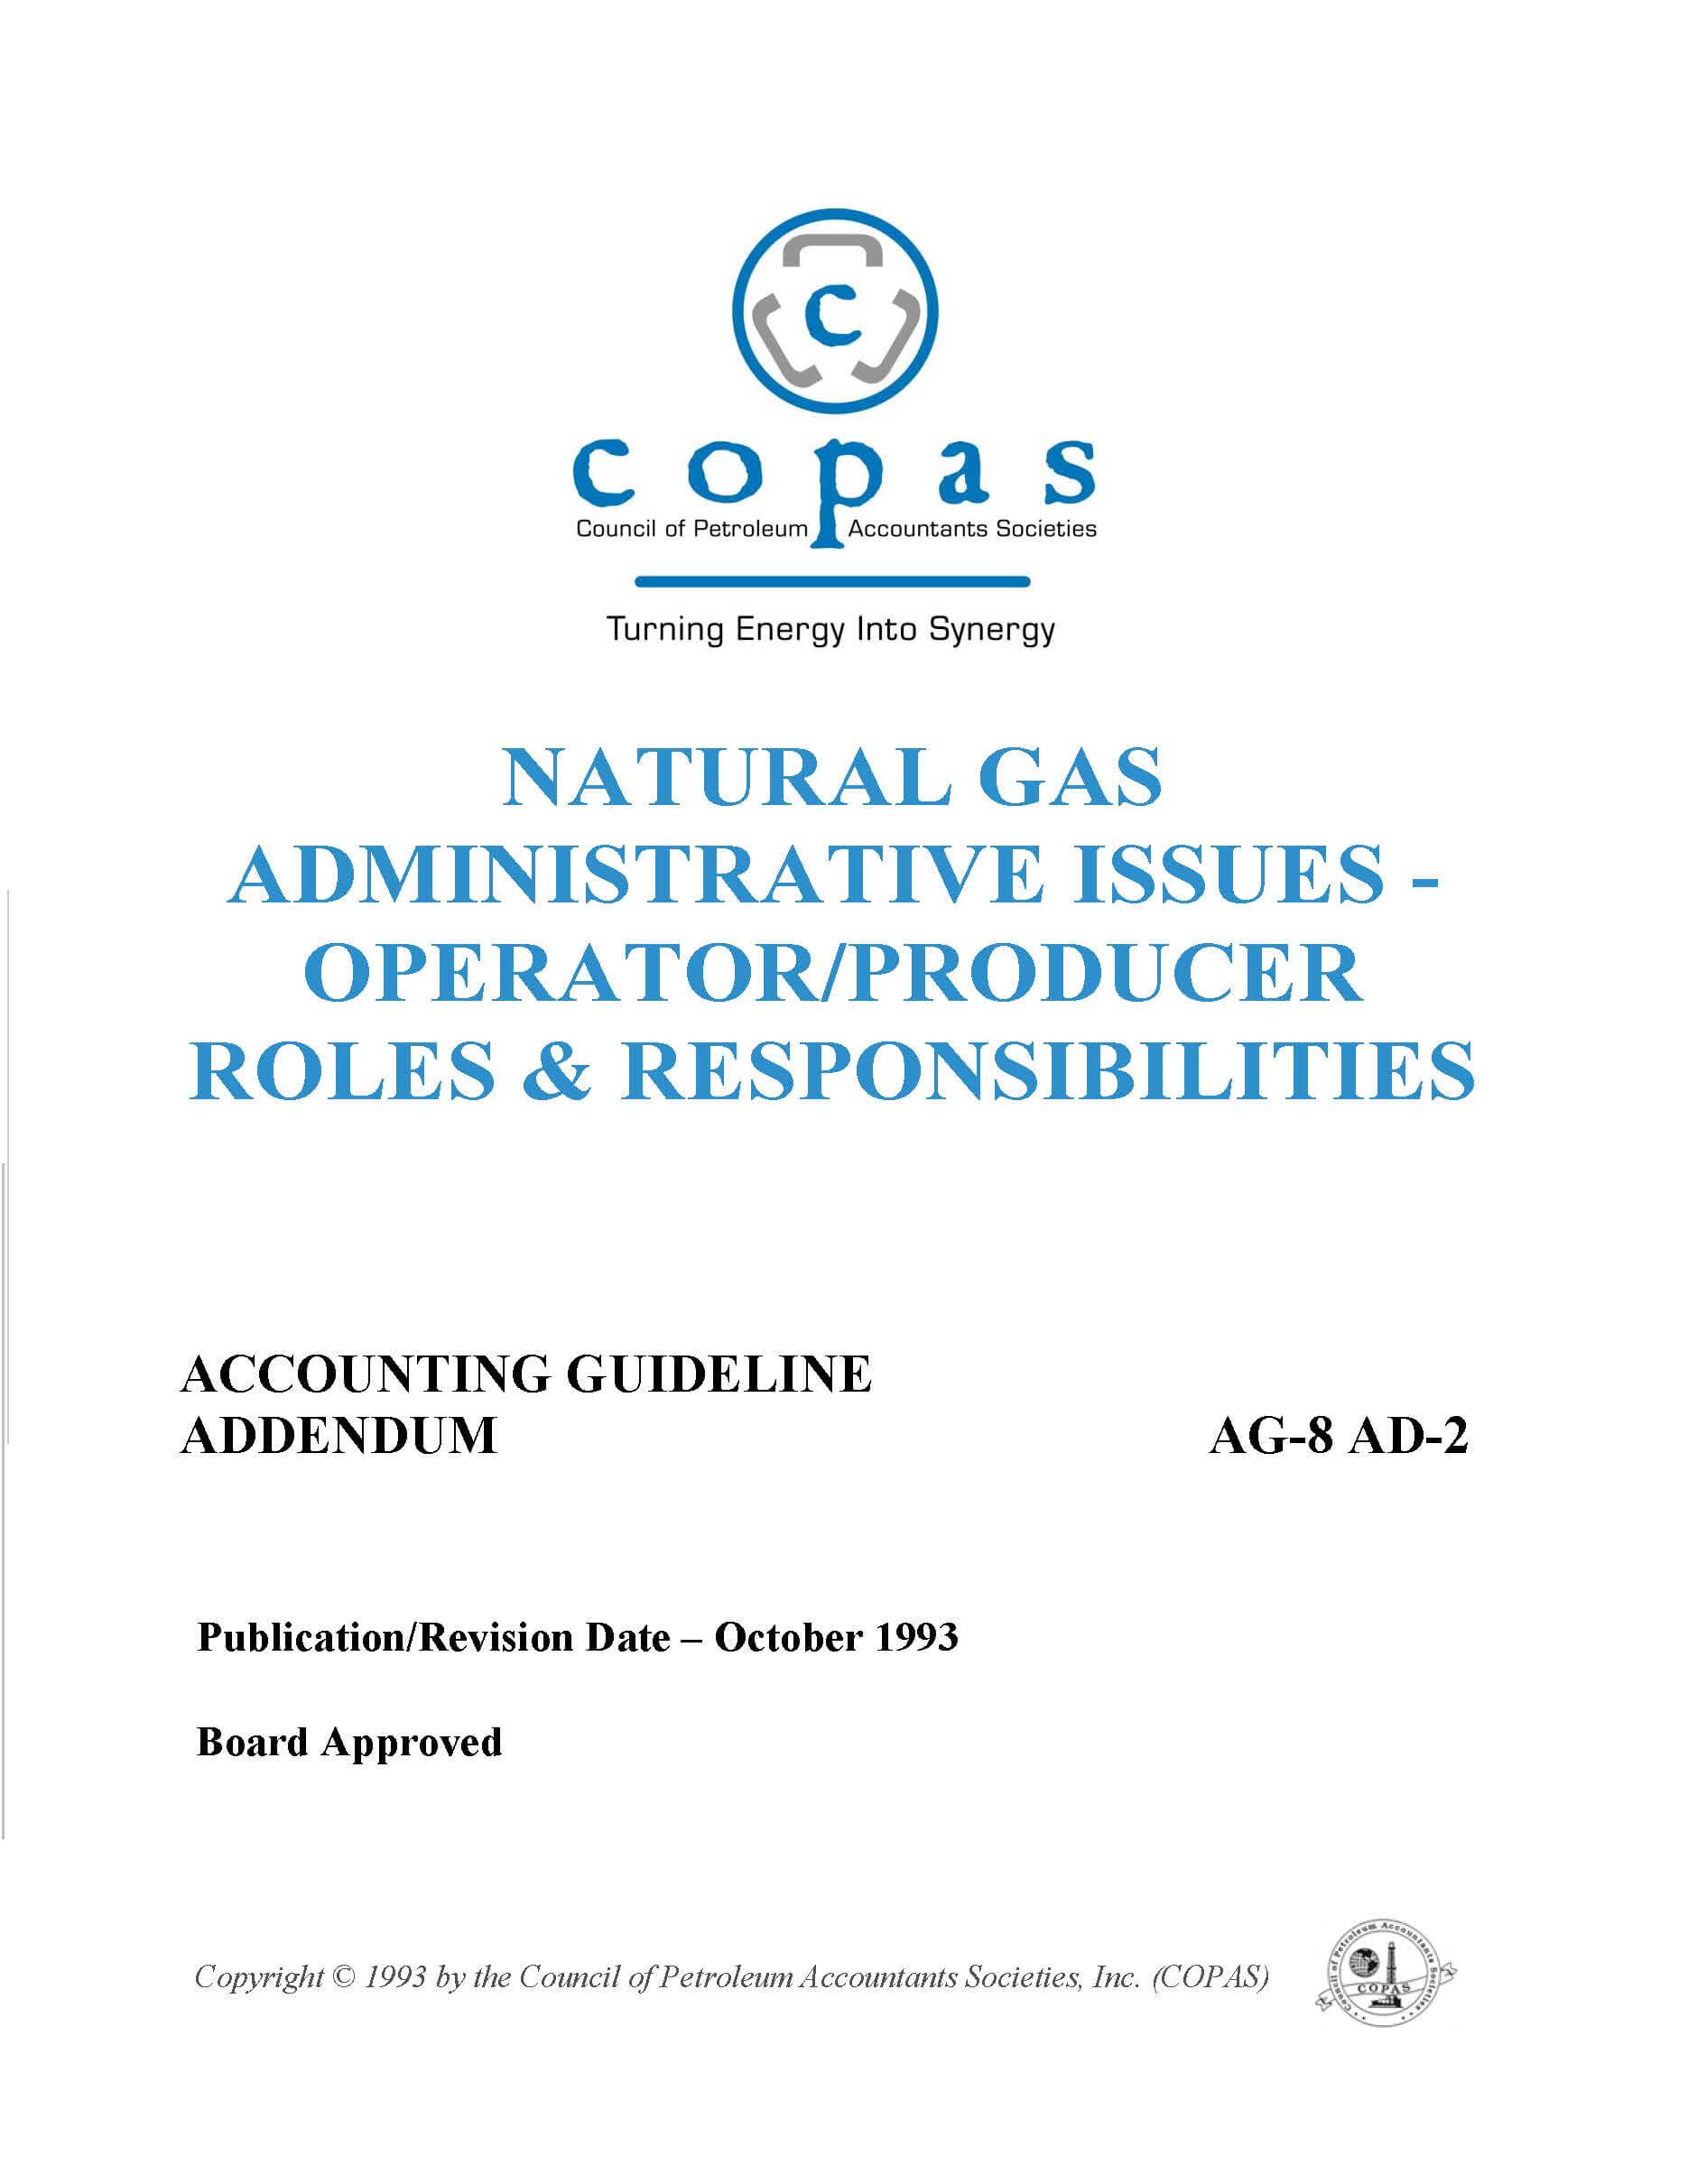 AG-8 AD-2 Natural Gas Administrative Issues - Operator / Producer Roles & Responsibilities - products AG 8 AD 2 Natural Gas Administrative Issues - Council of Petroleum Accountants Societies